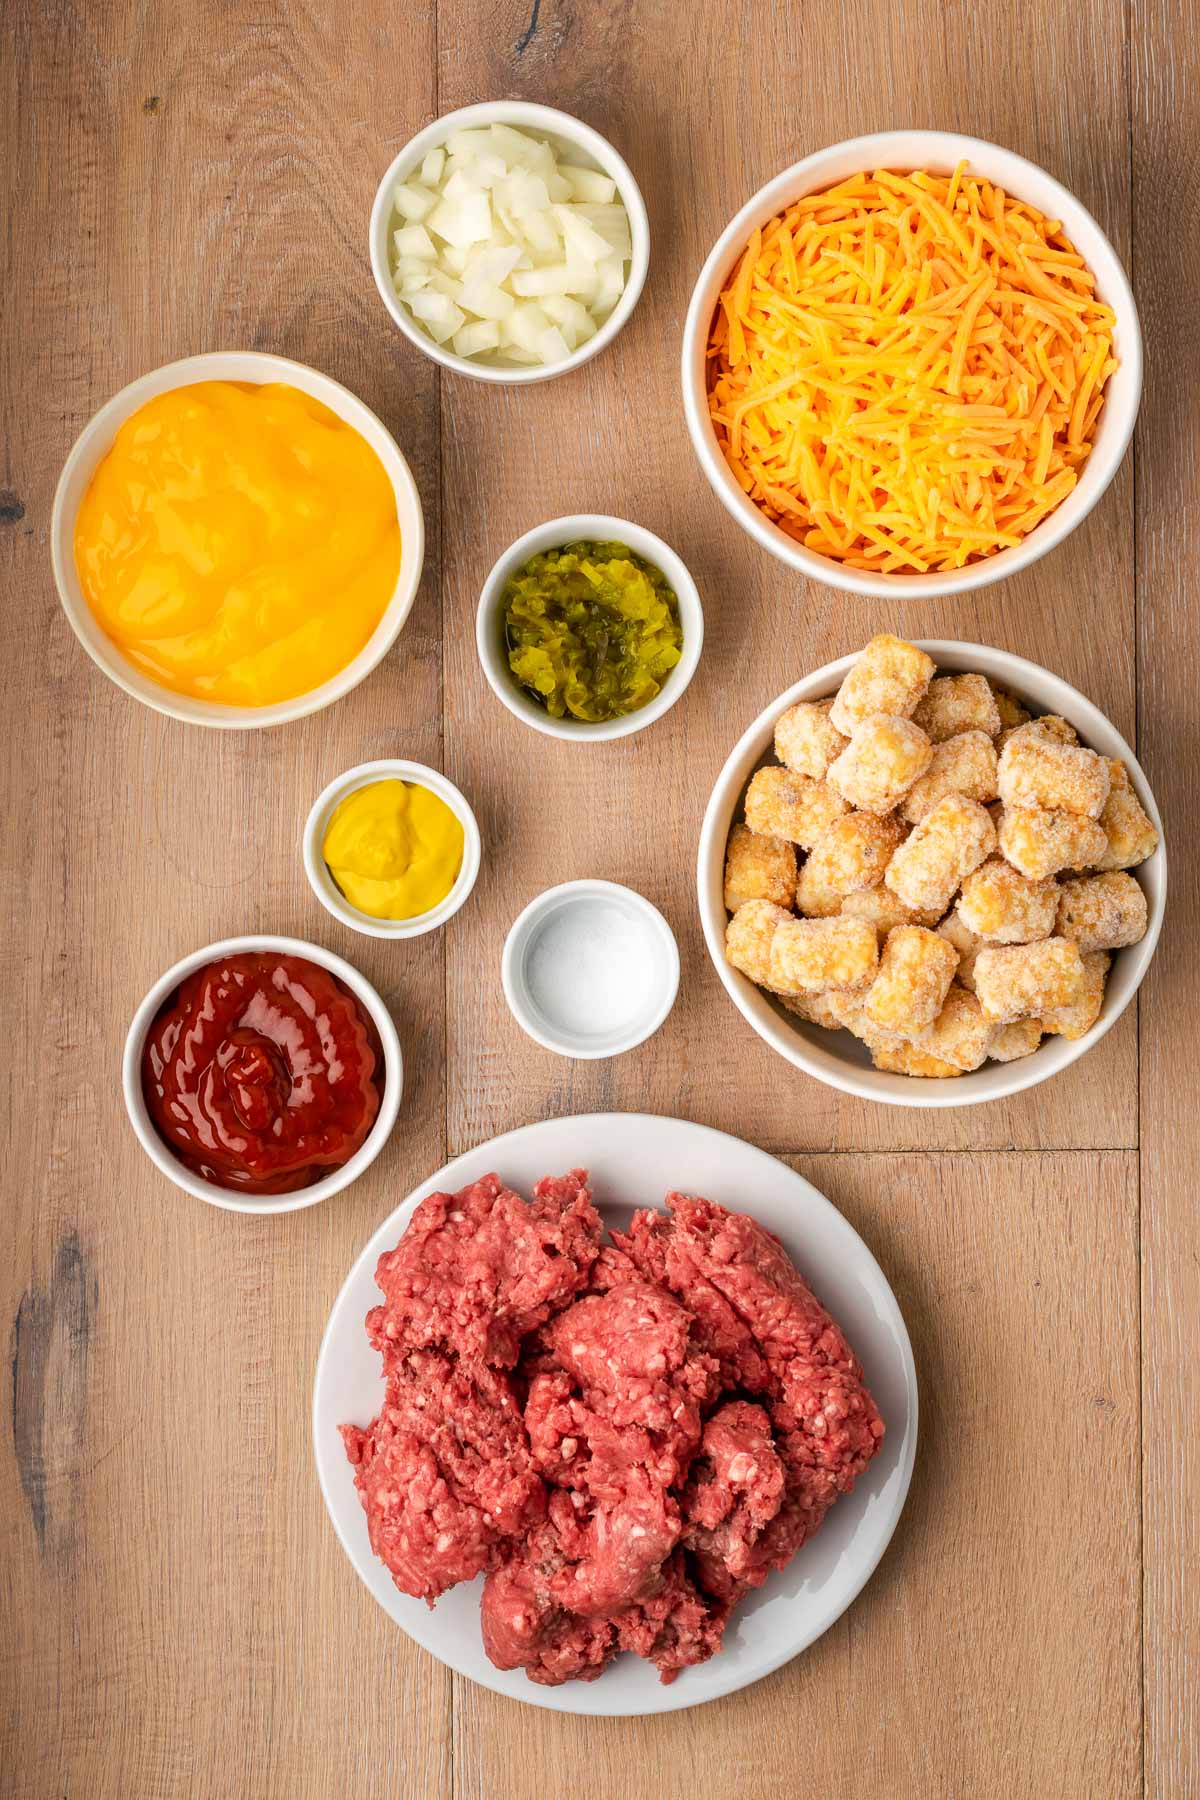 Ingredients for Cheeseburger Tater Tot Casserole.